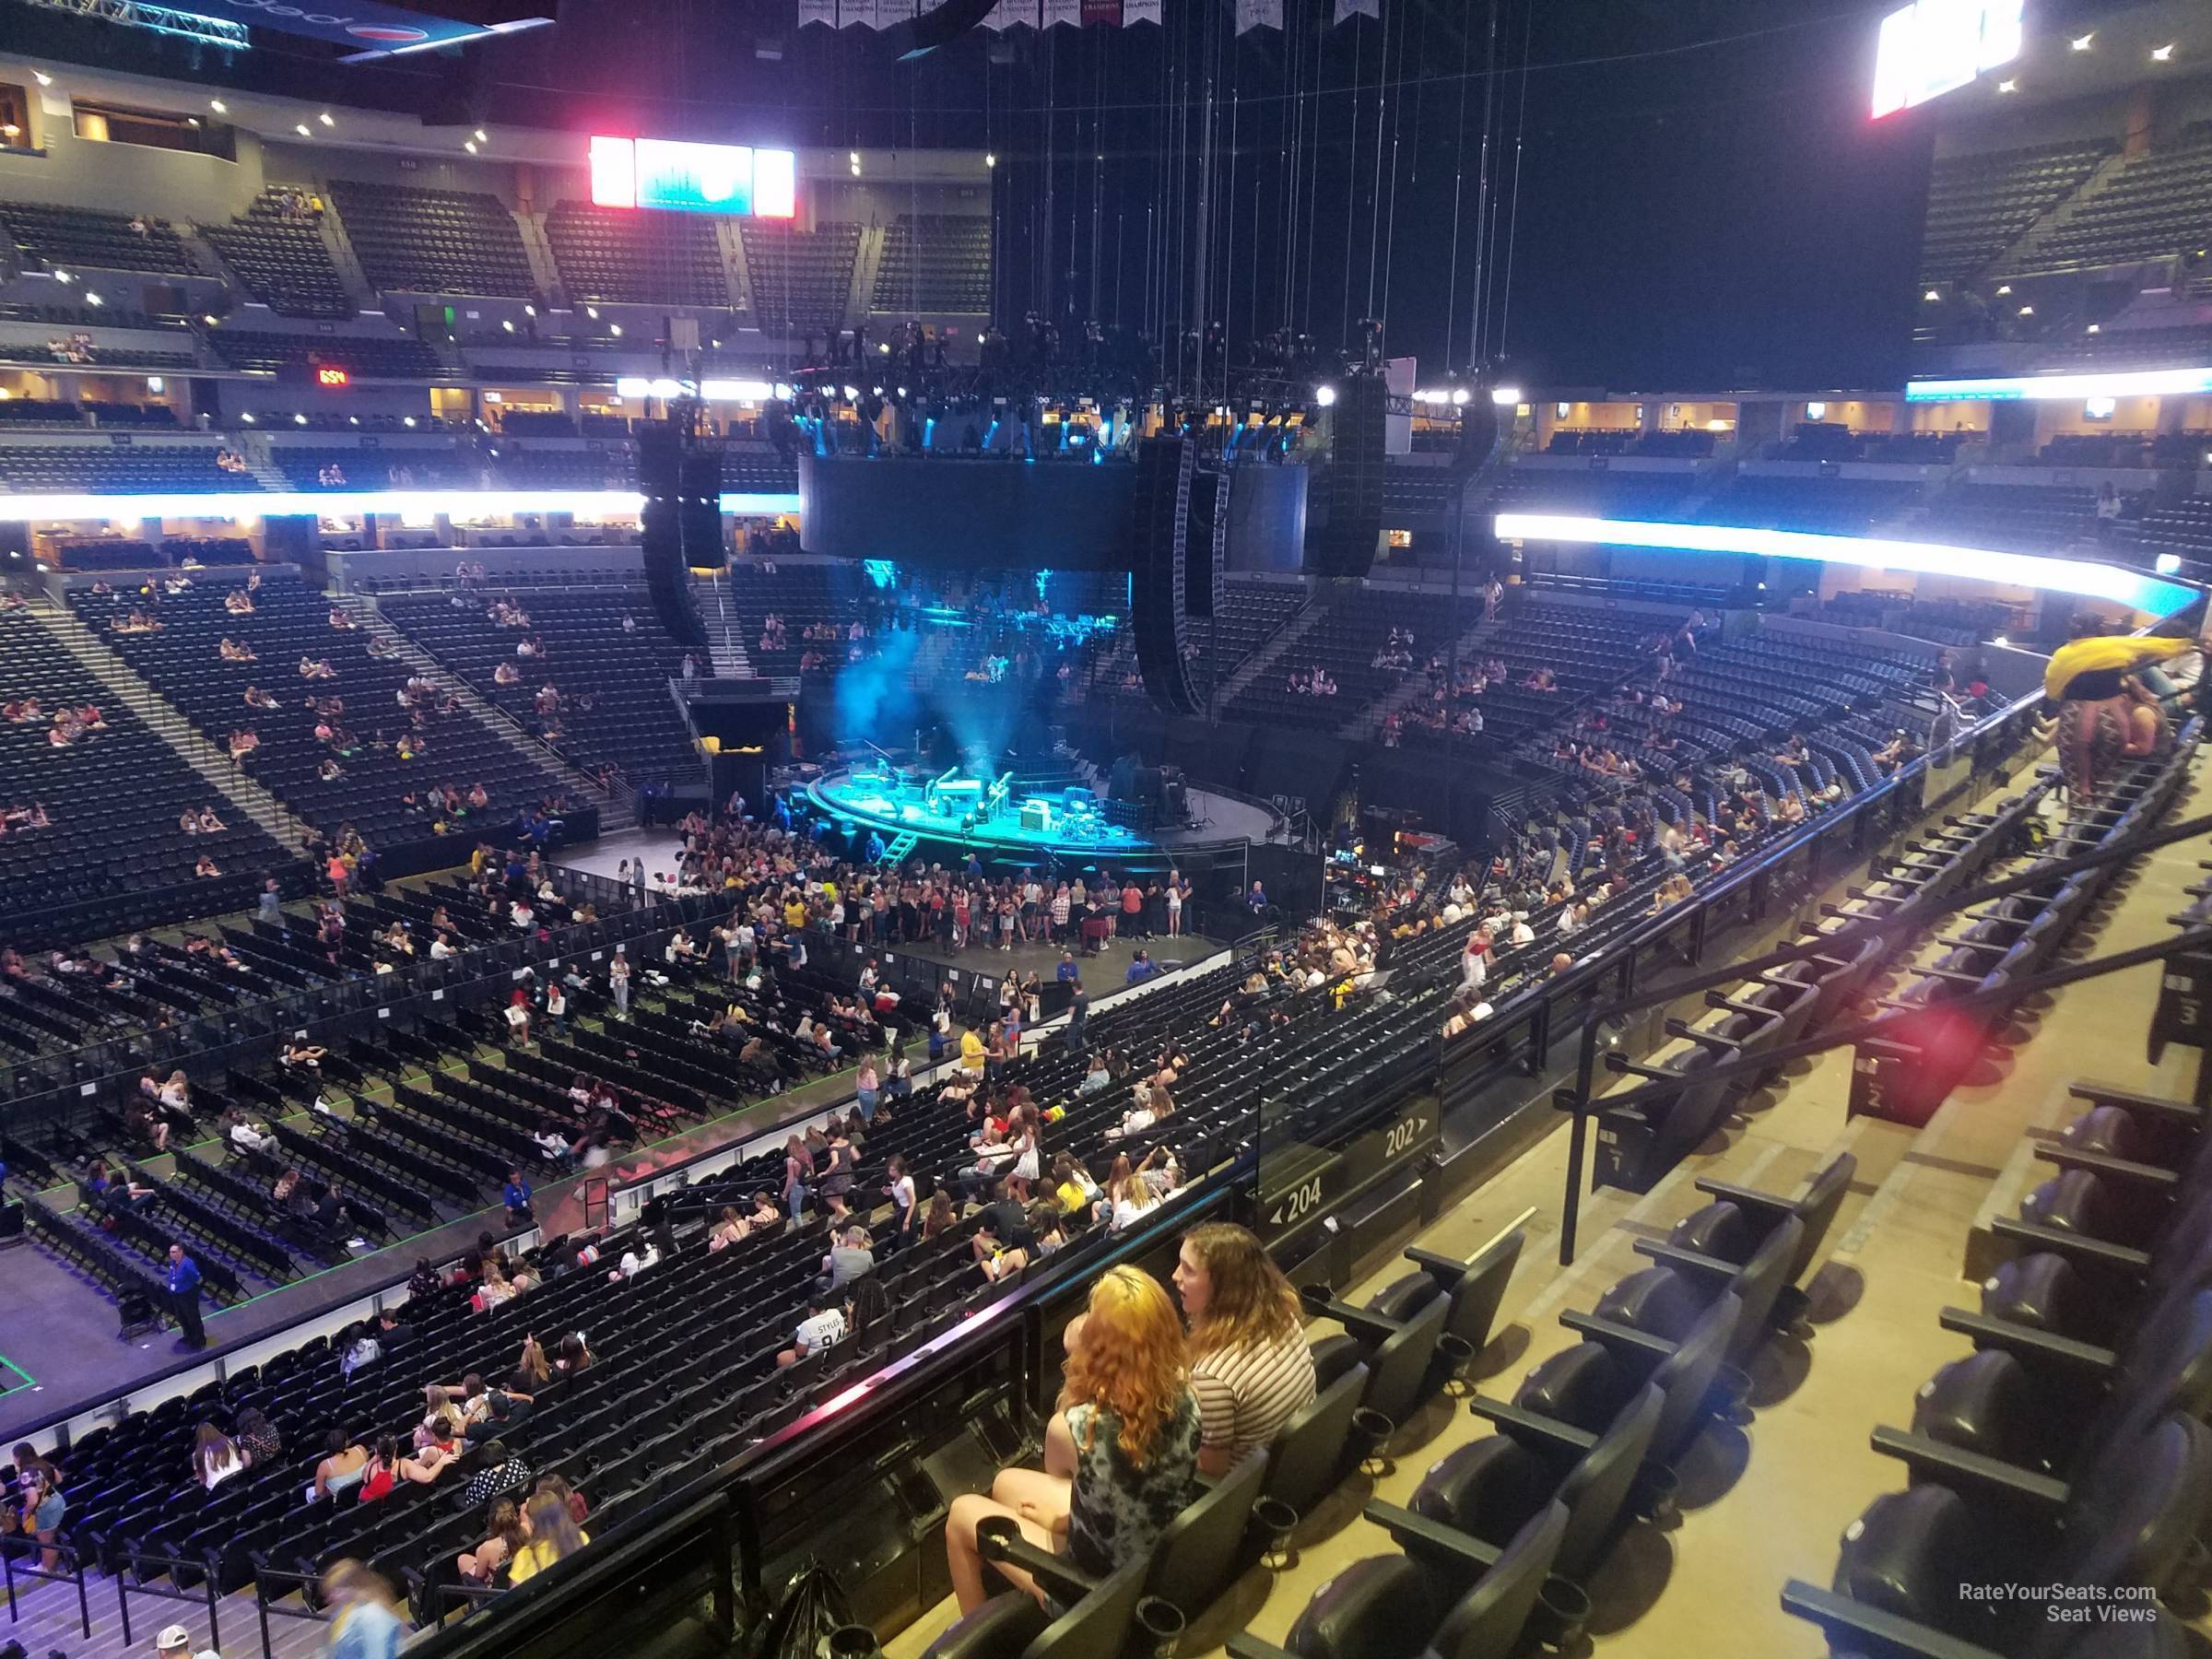 section 204, row 4 seat view  for concert - ball arena